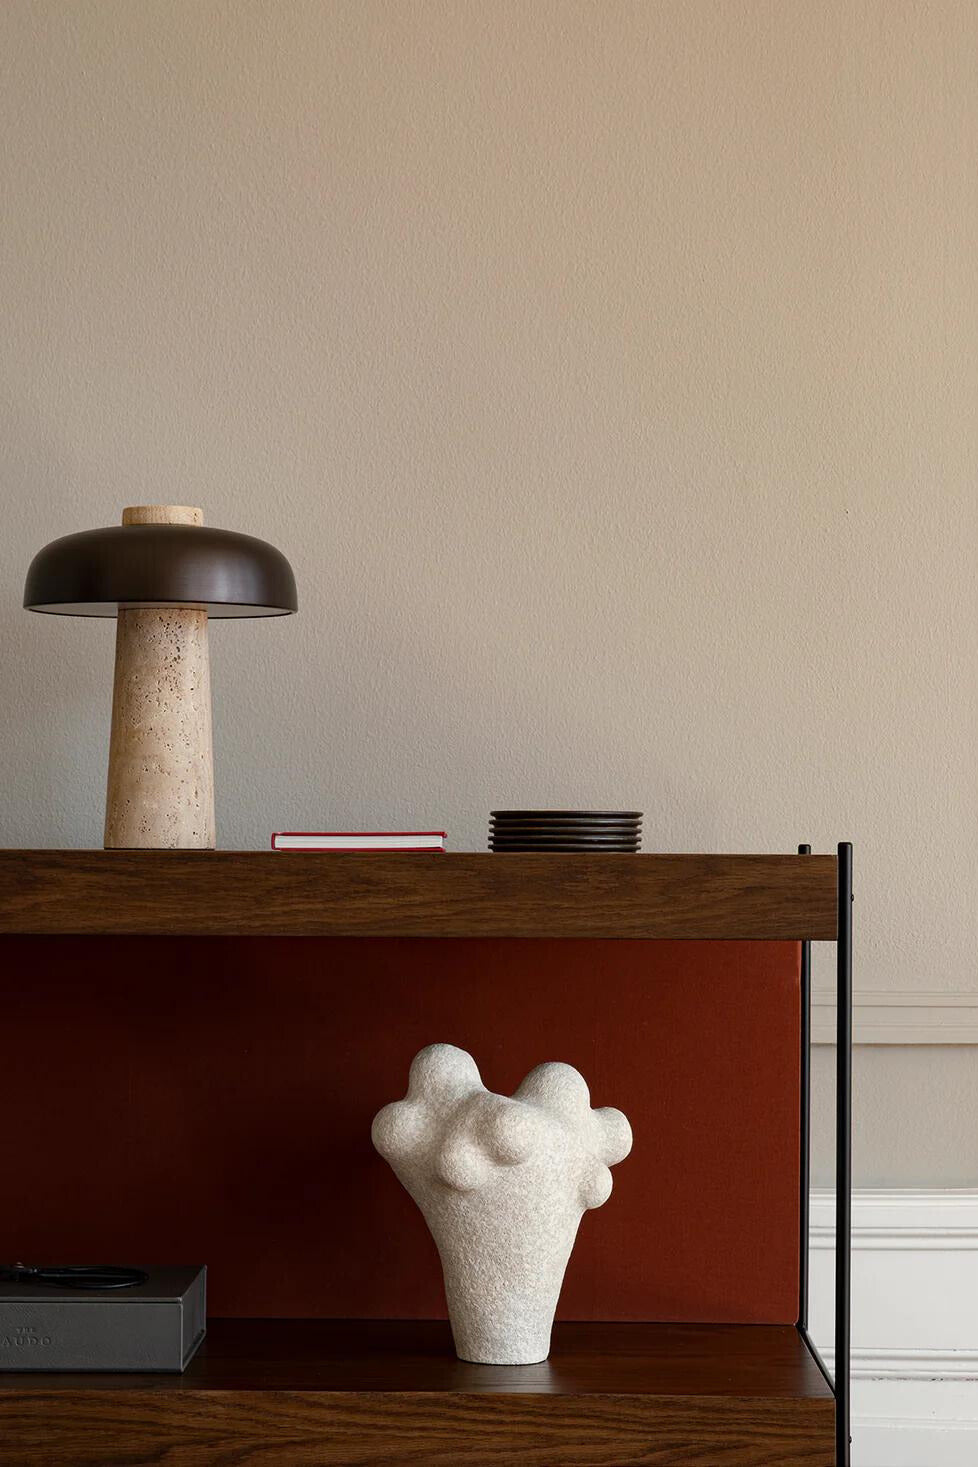 The Reverse Table Lamp from Audo Copenhagen on a cabinet.